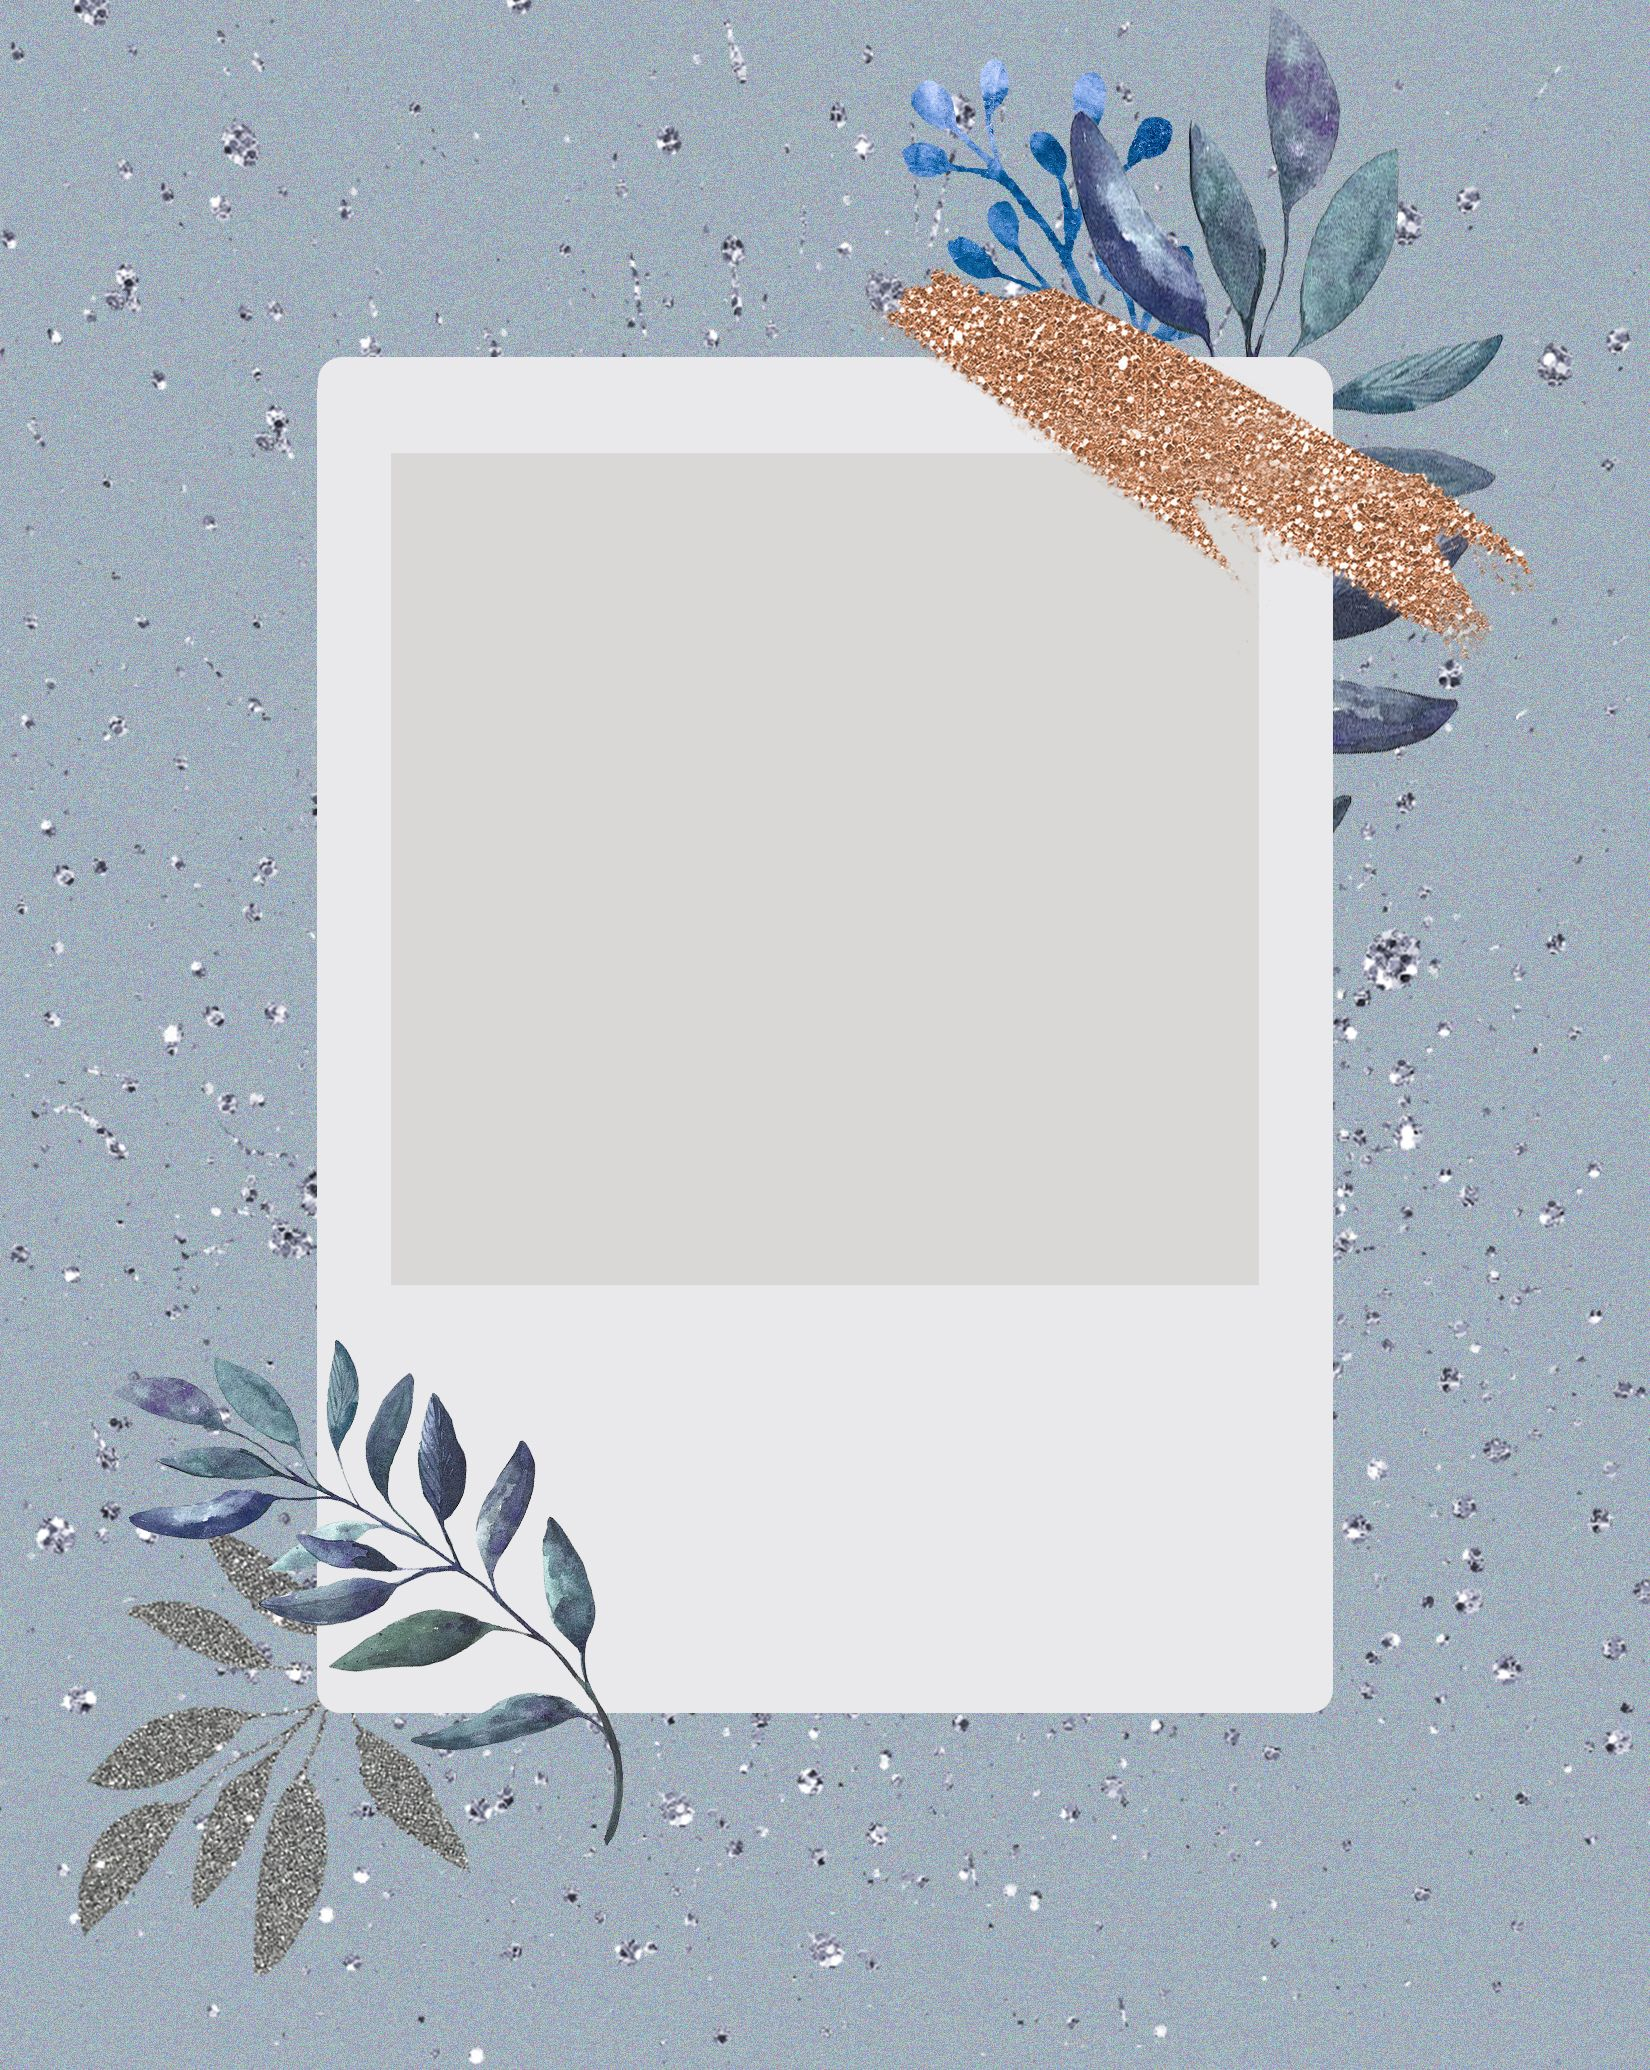 1650x2070 background #backgrounds #polaroid #frame #aesthetic #freetoedit | Instagram frame template, Paper background design, Photo collage template